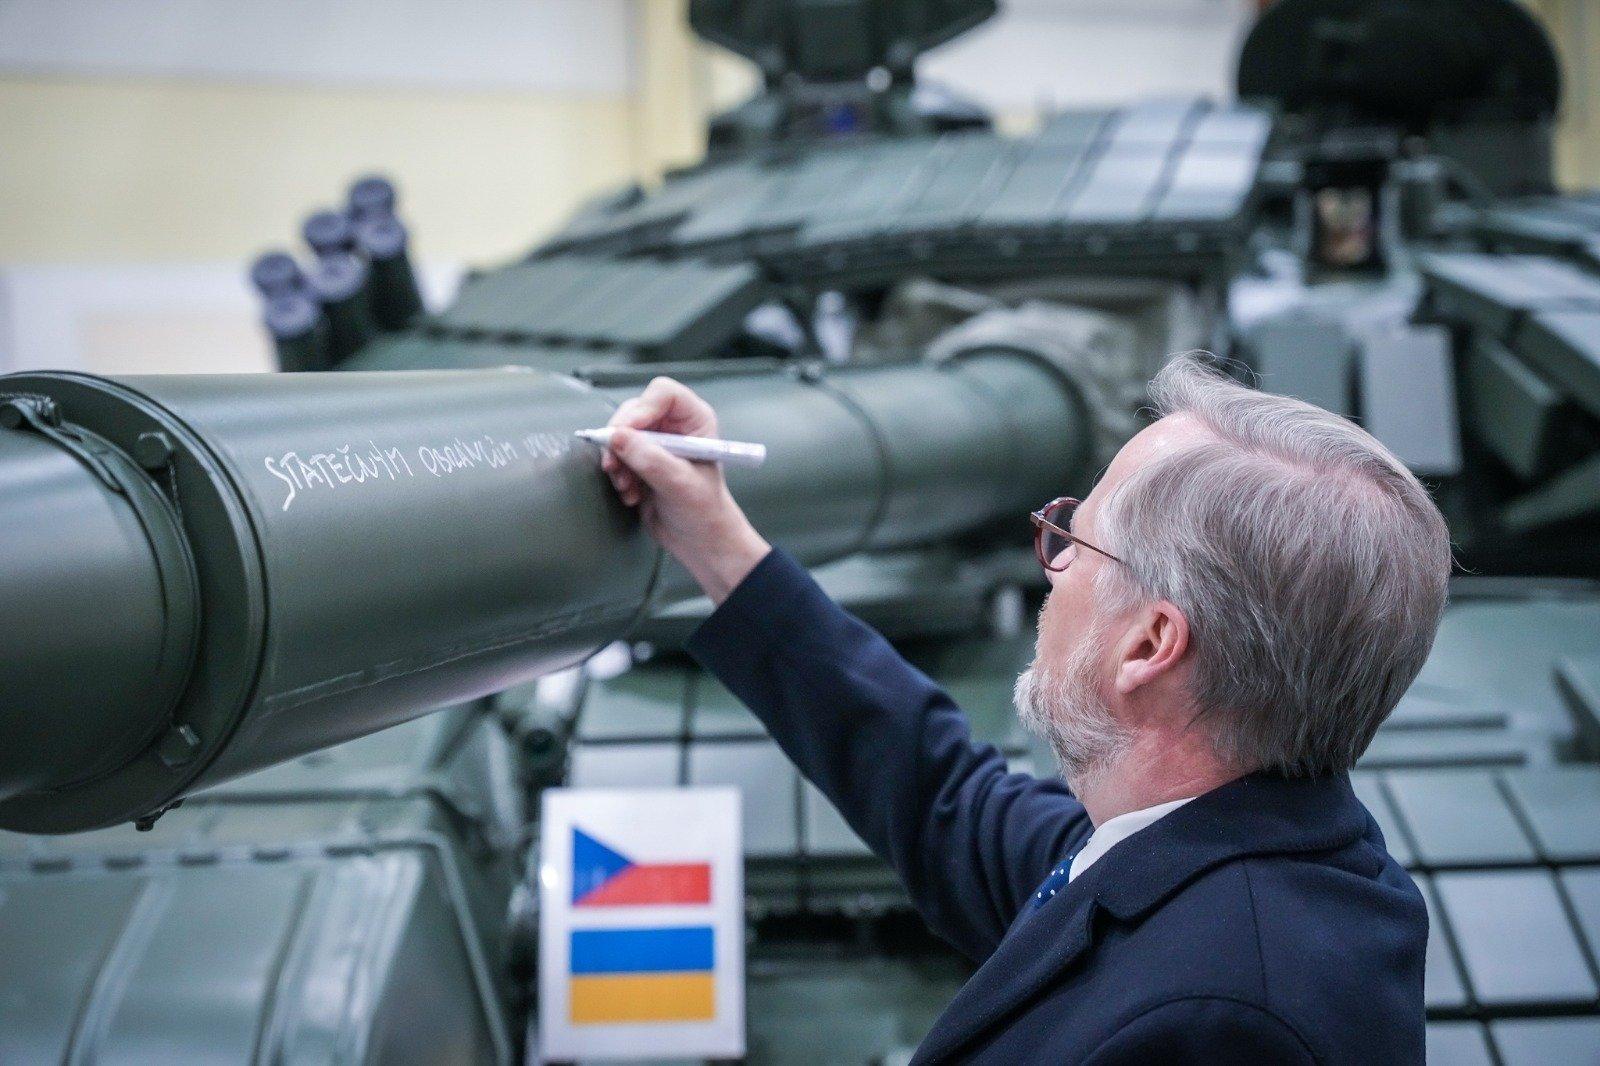 The Czech Republic is preparing tanks to be sent to Ukraine: the prime minister left an "autograph" on the T-72